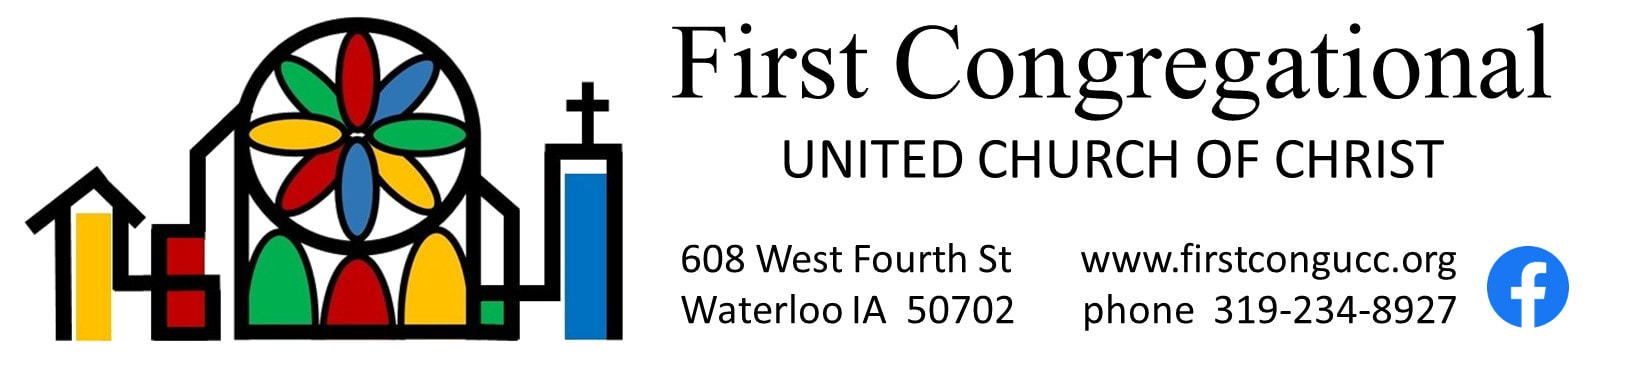 Image with First Congregational United Church of Christ logo with contact information